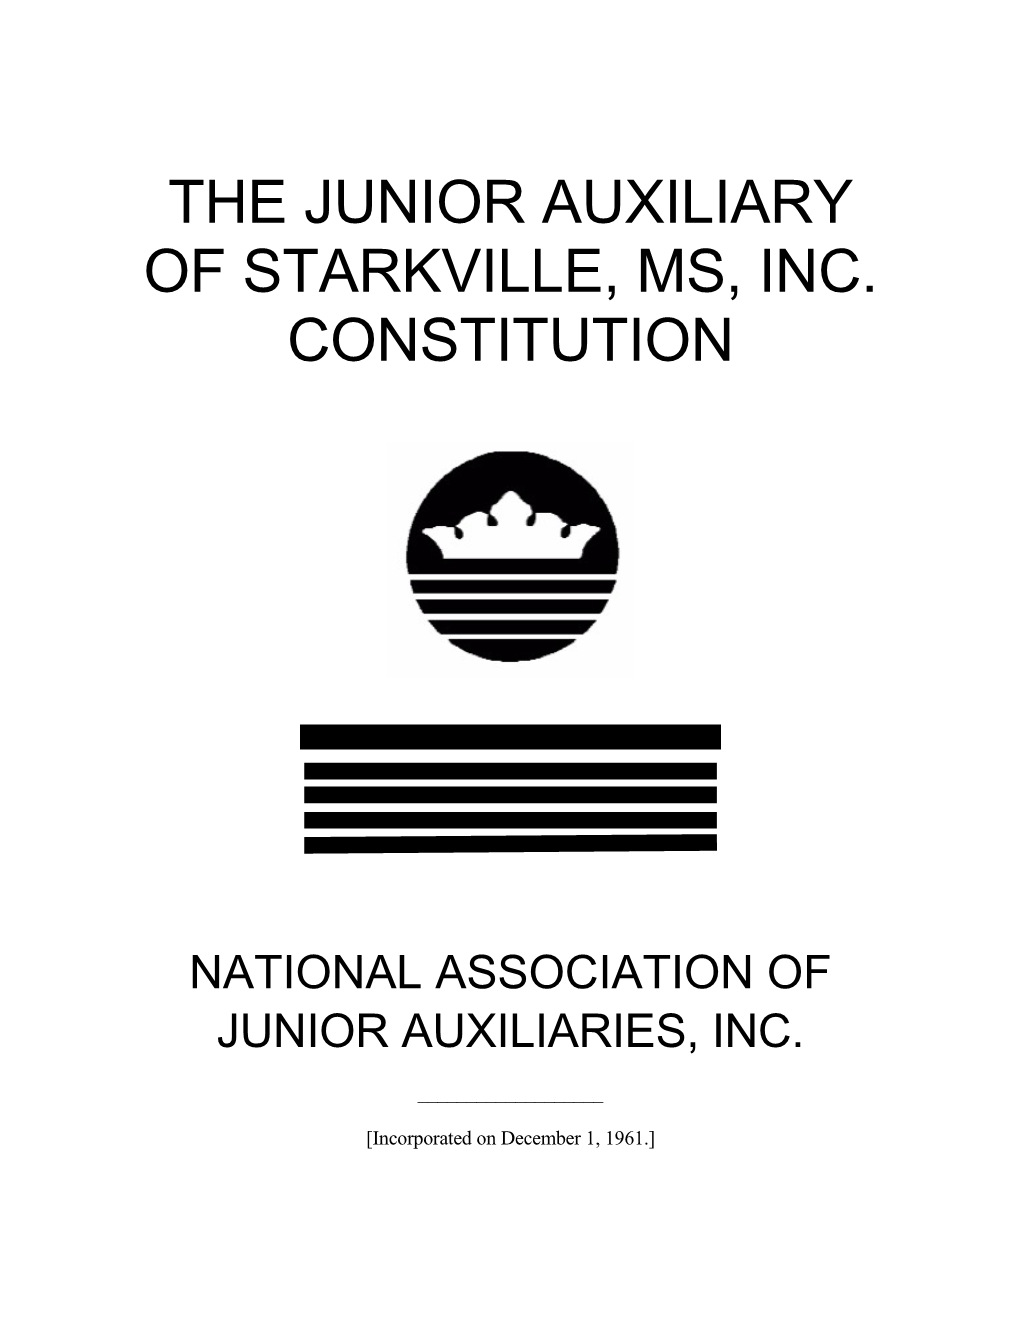 The Junior Auxiliary of Starkville, Ms, Inc